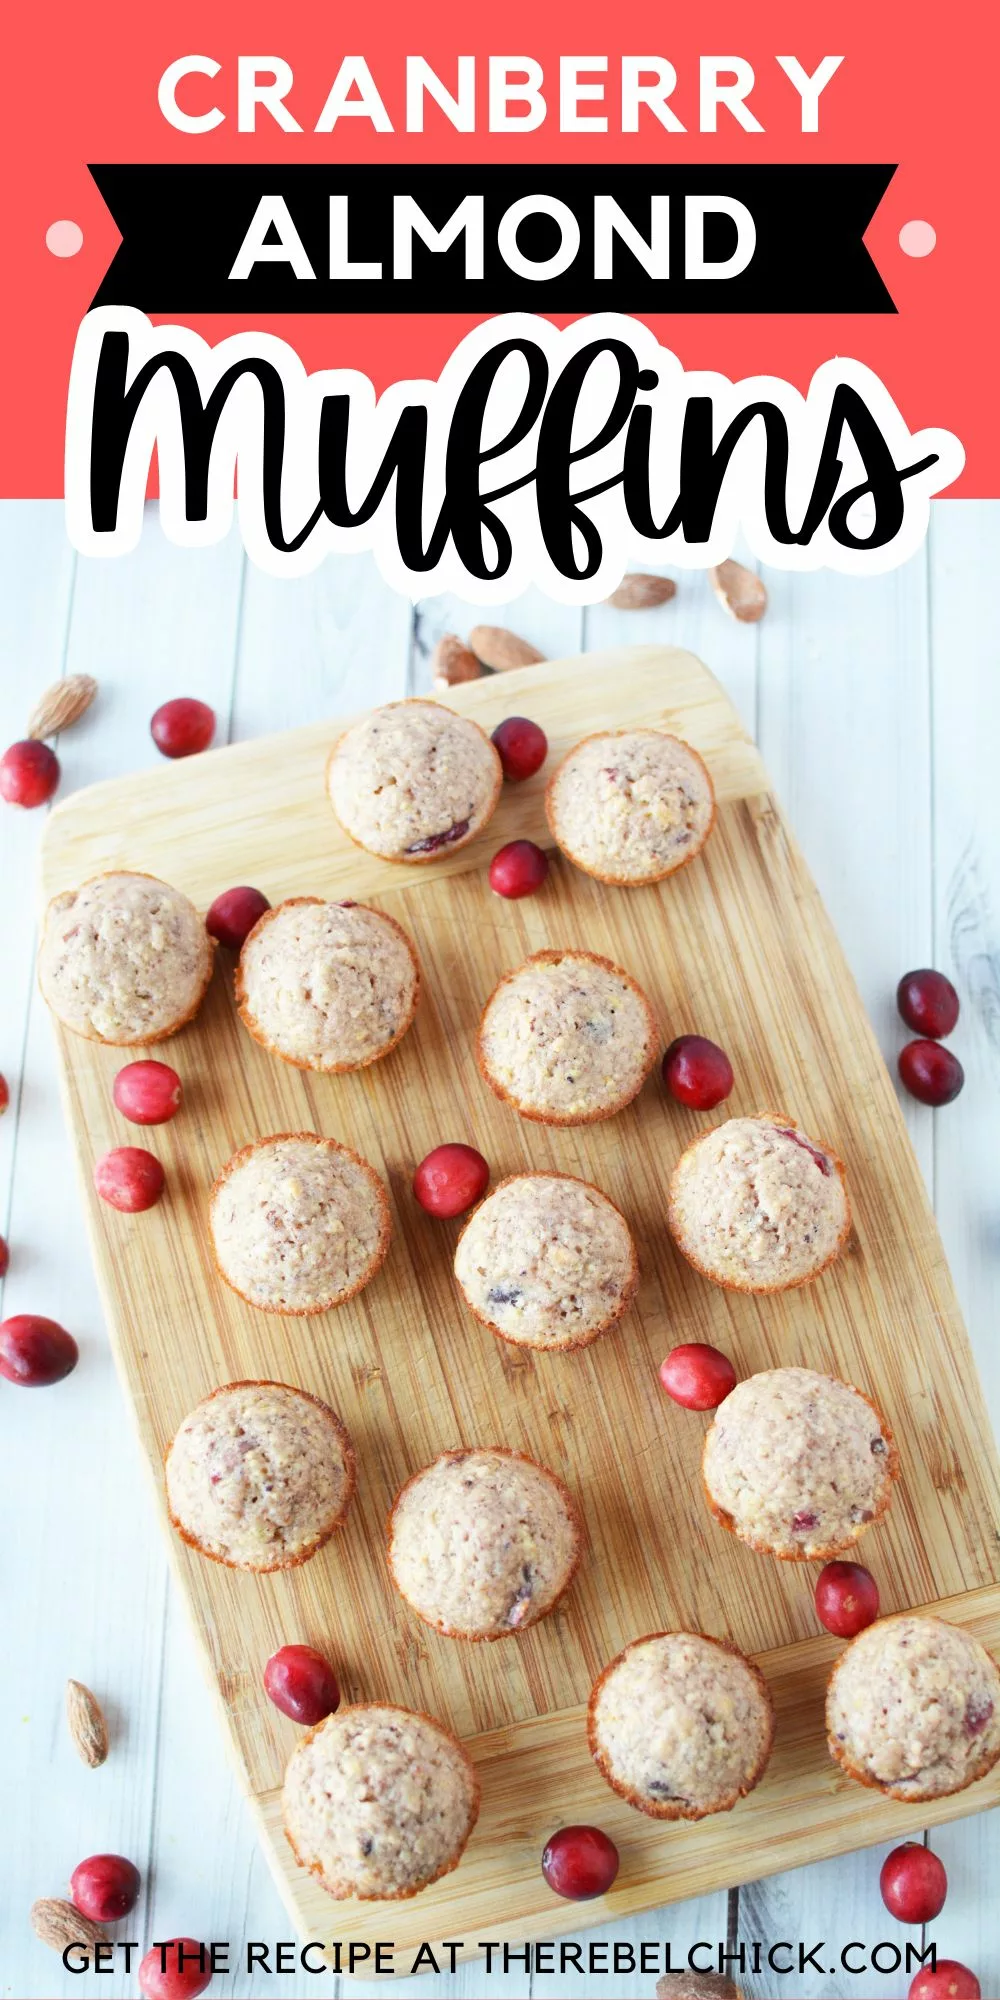 Mini Muffins on a wooden cutting board with fresh cranberries and sliced almonds